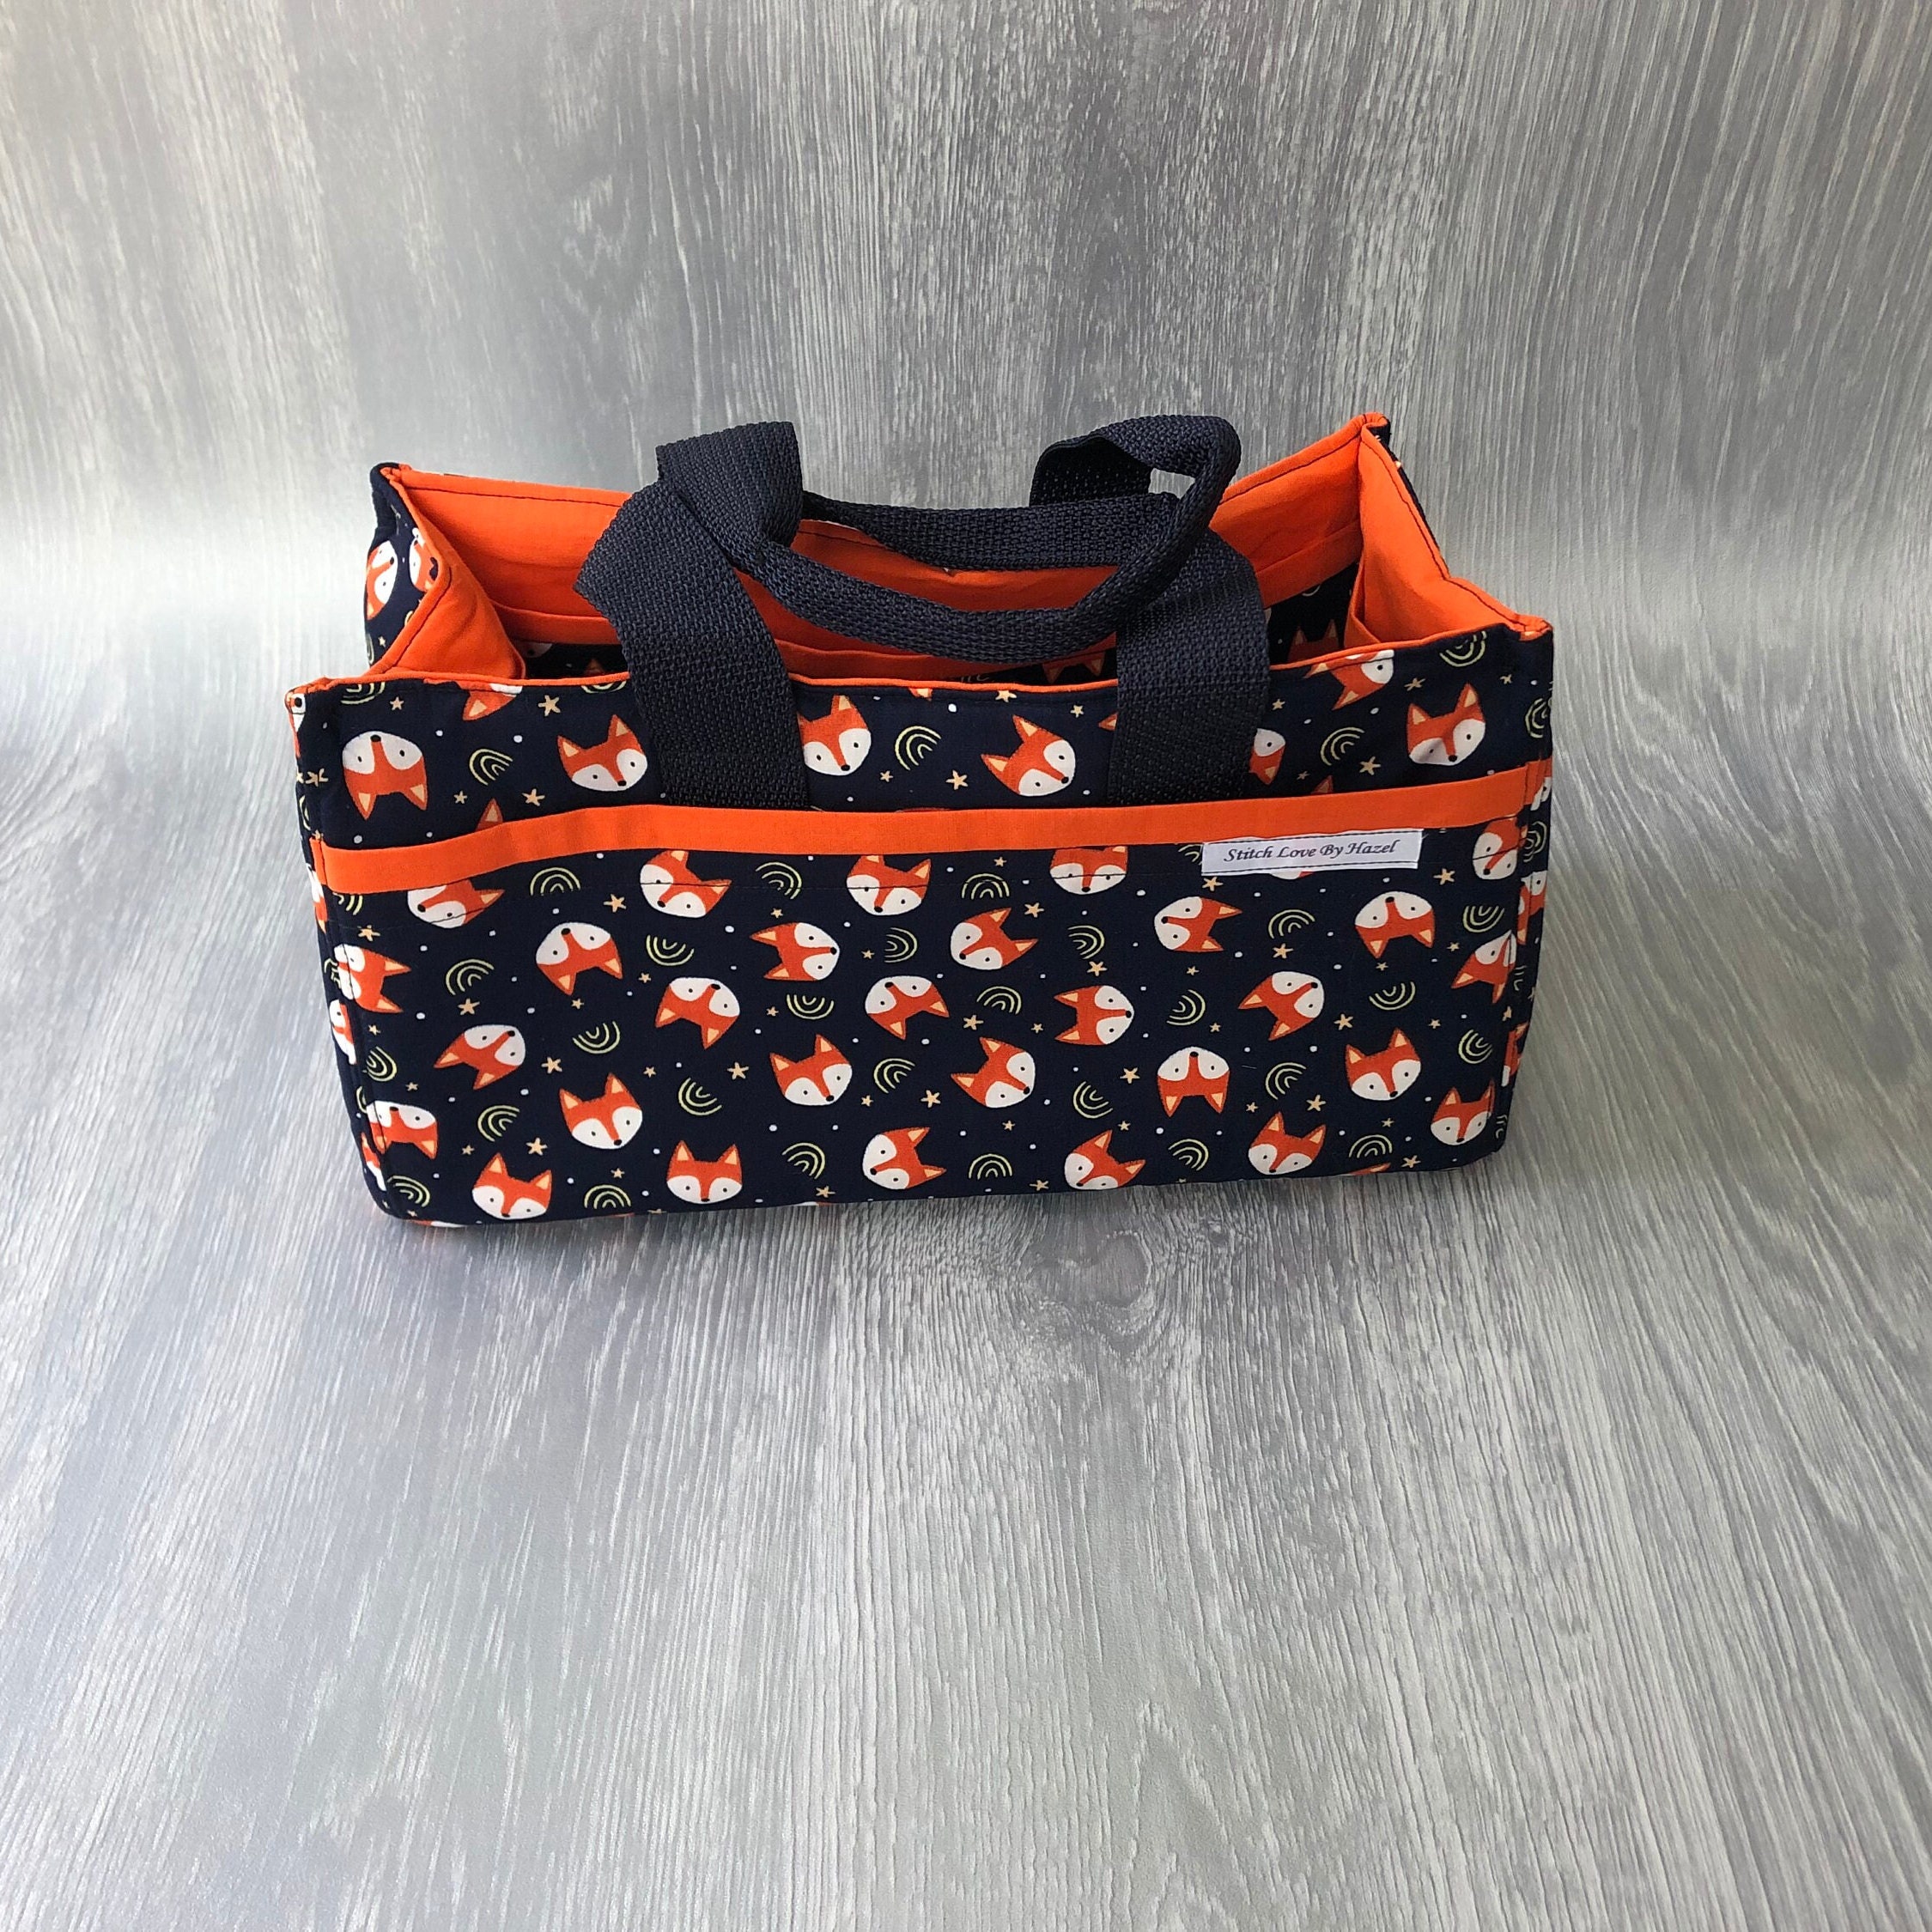 Purse Made from Recycled Seatbelts - CraftFoxes Shop - Craftfoxes